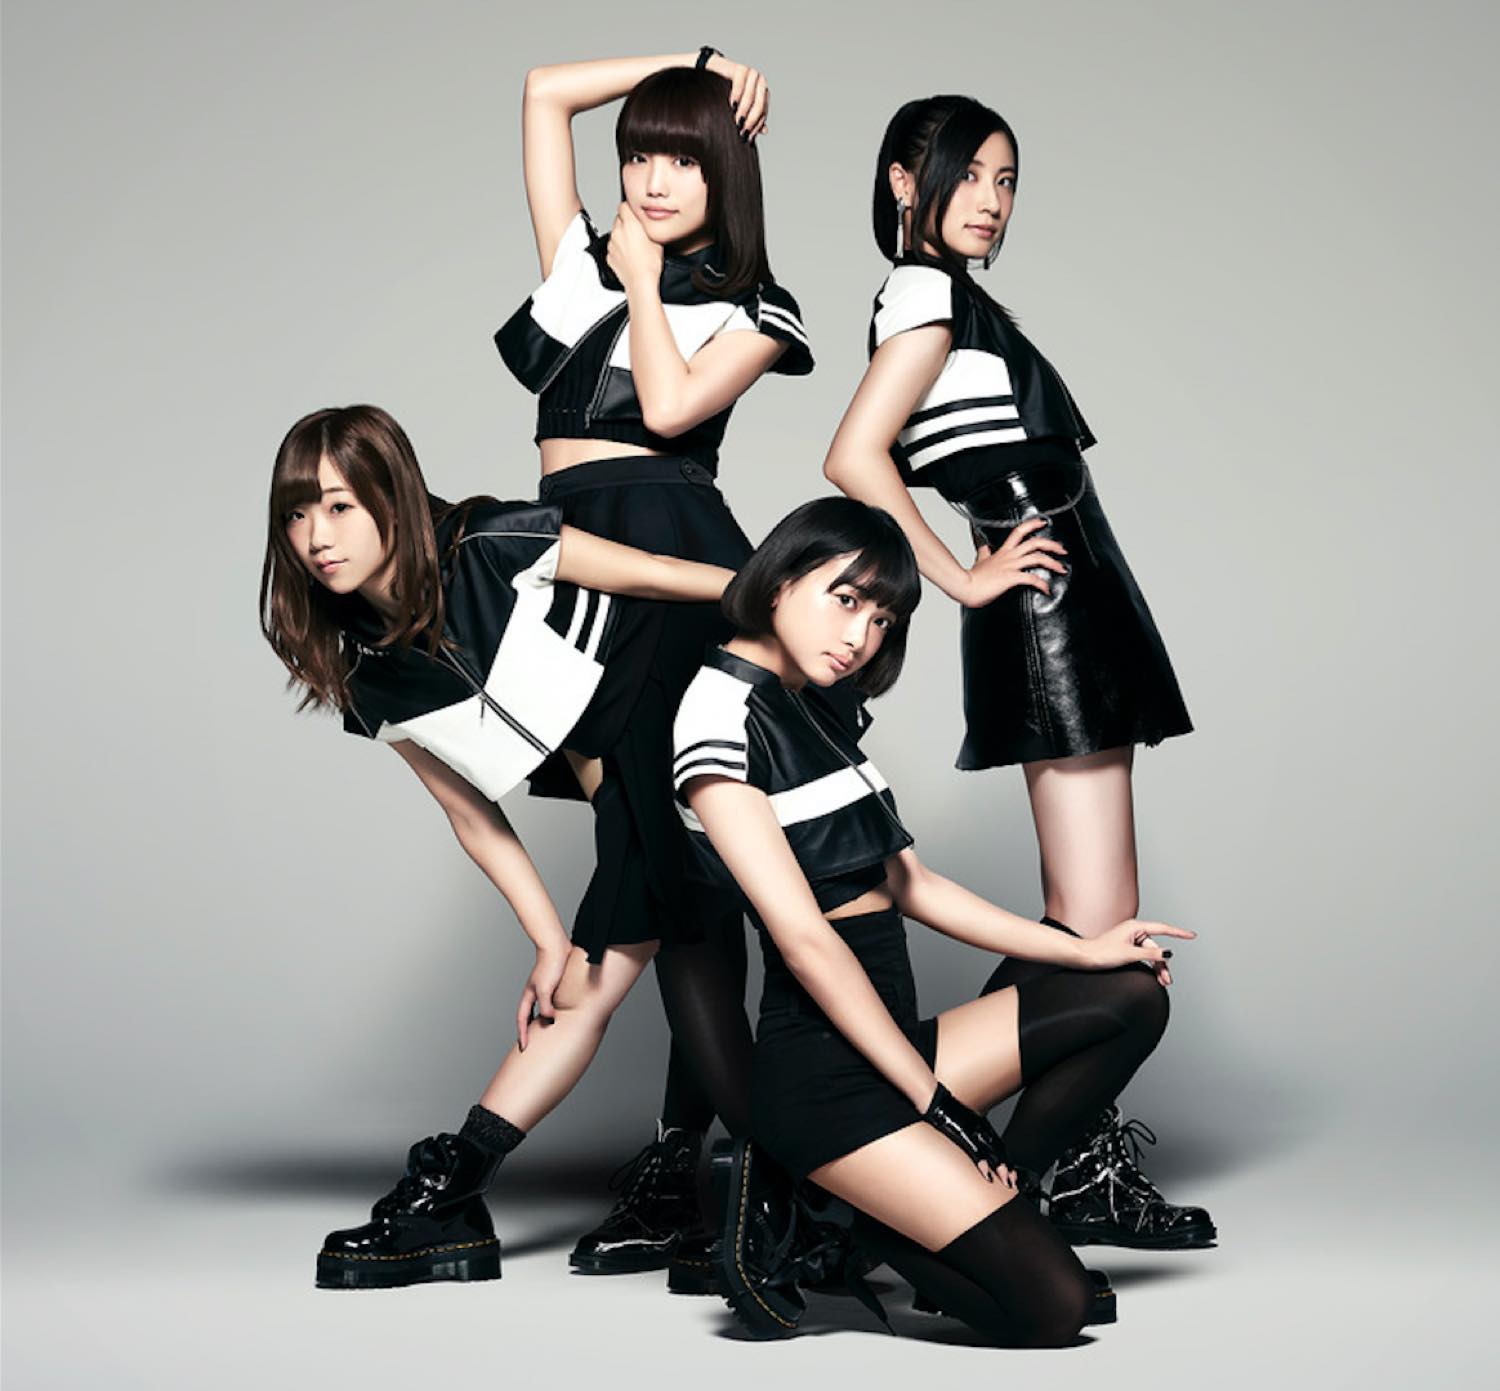 PassCode Destroy All Obstacles in the MV for Their Major Label Debut Single “MISS UNLIMITED”!